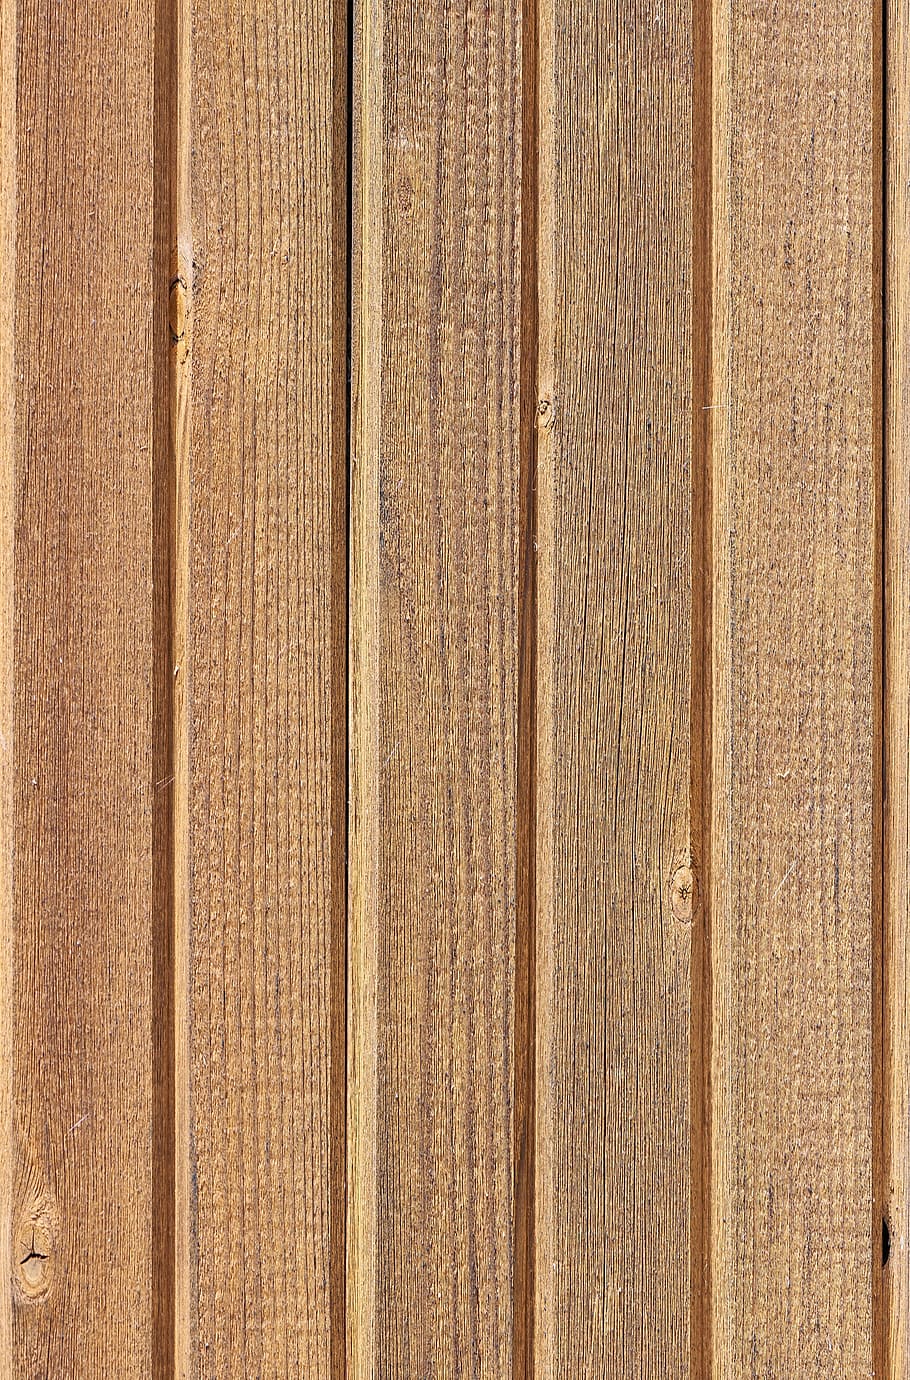 untitled, wood, profile wood, boards, background, background wood, pattern, texture, old, weathered